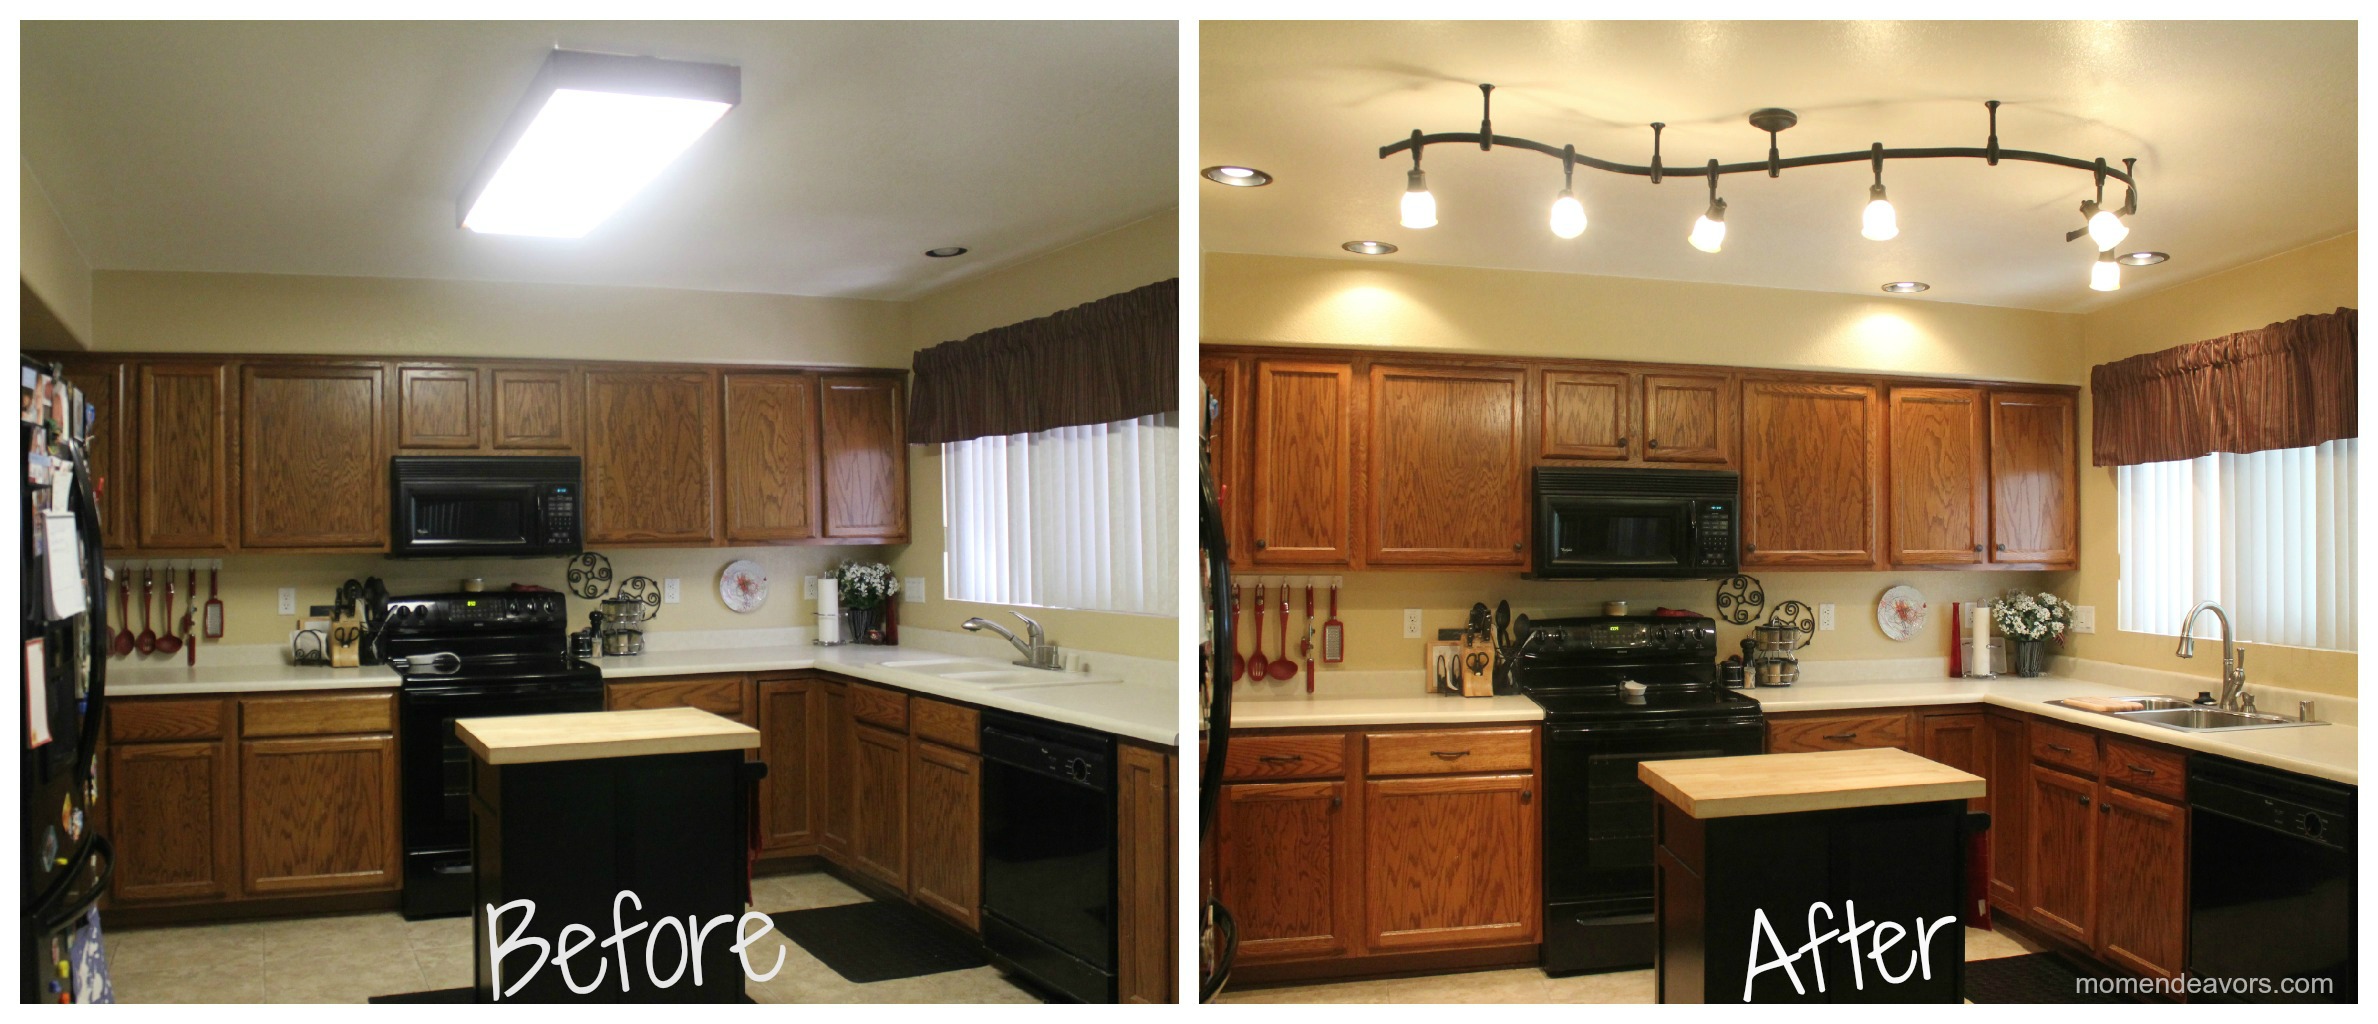 Mini Kitchen Remodel New Lighting Makes A WORLD Of Difference